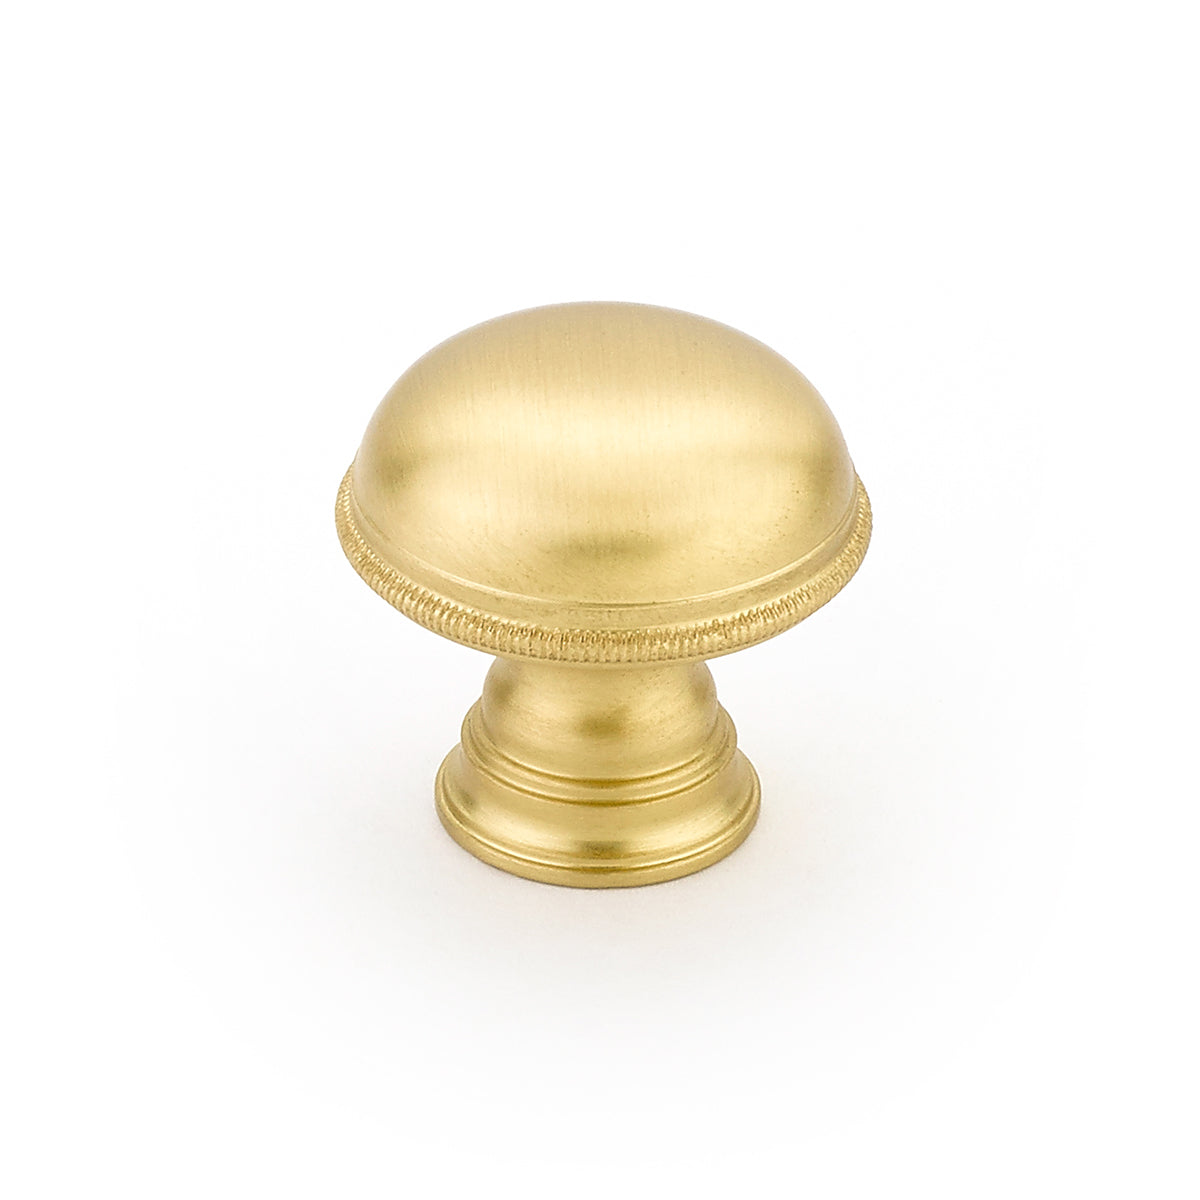 1 1/4 Inch Atherton Smooth Surface Knob with Knurled Edges (Satin Brass Finish)